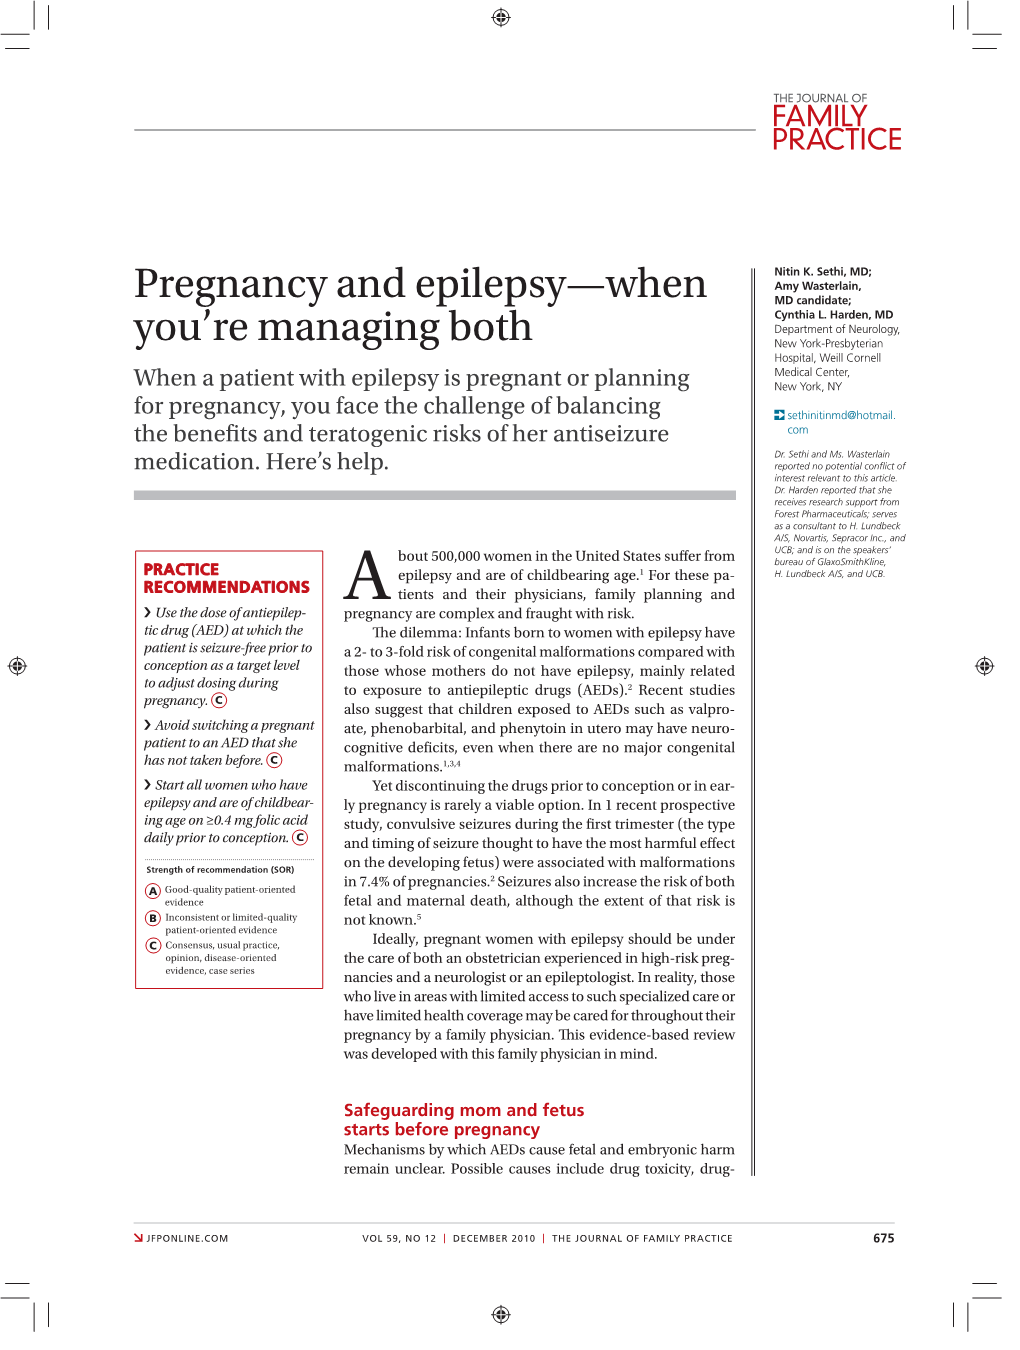 Pregnancy and Epilepsy—When You're Managing Both